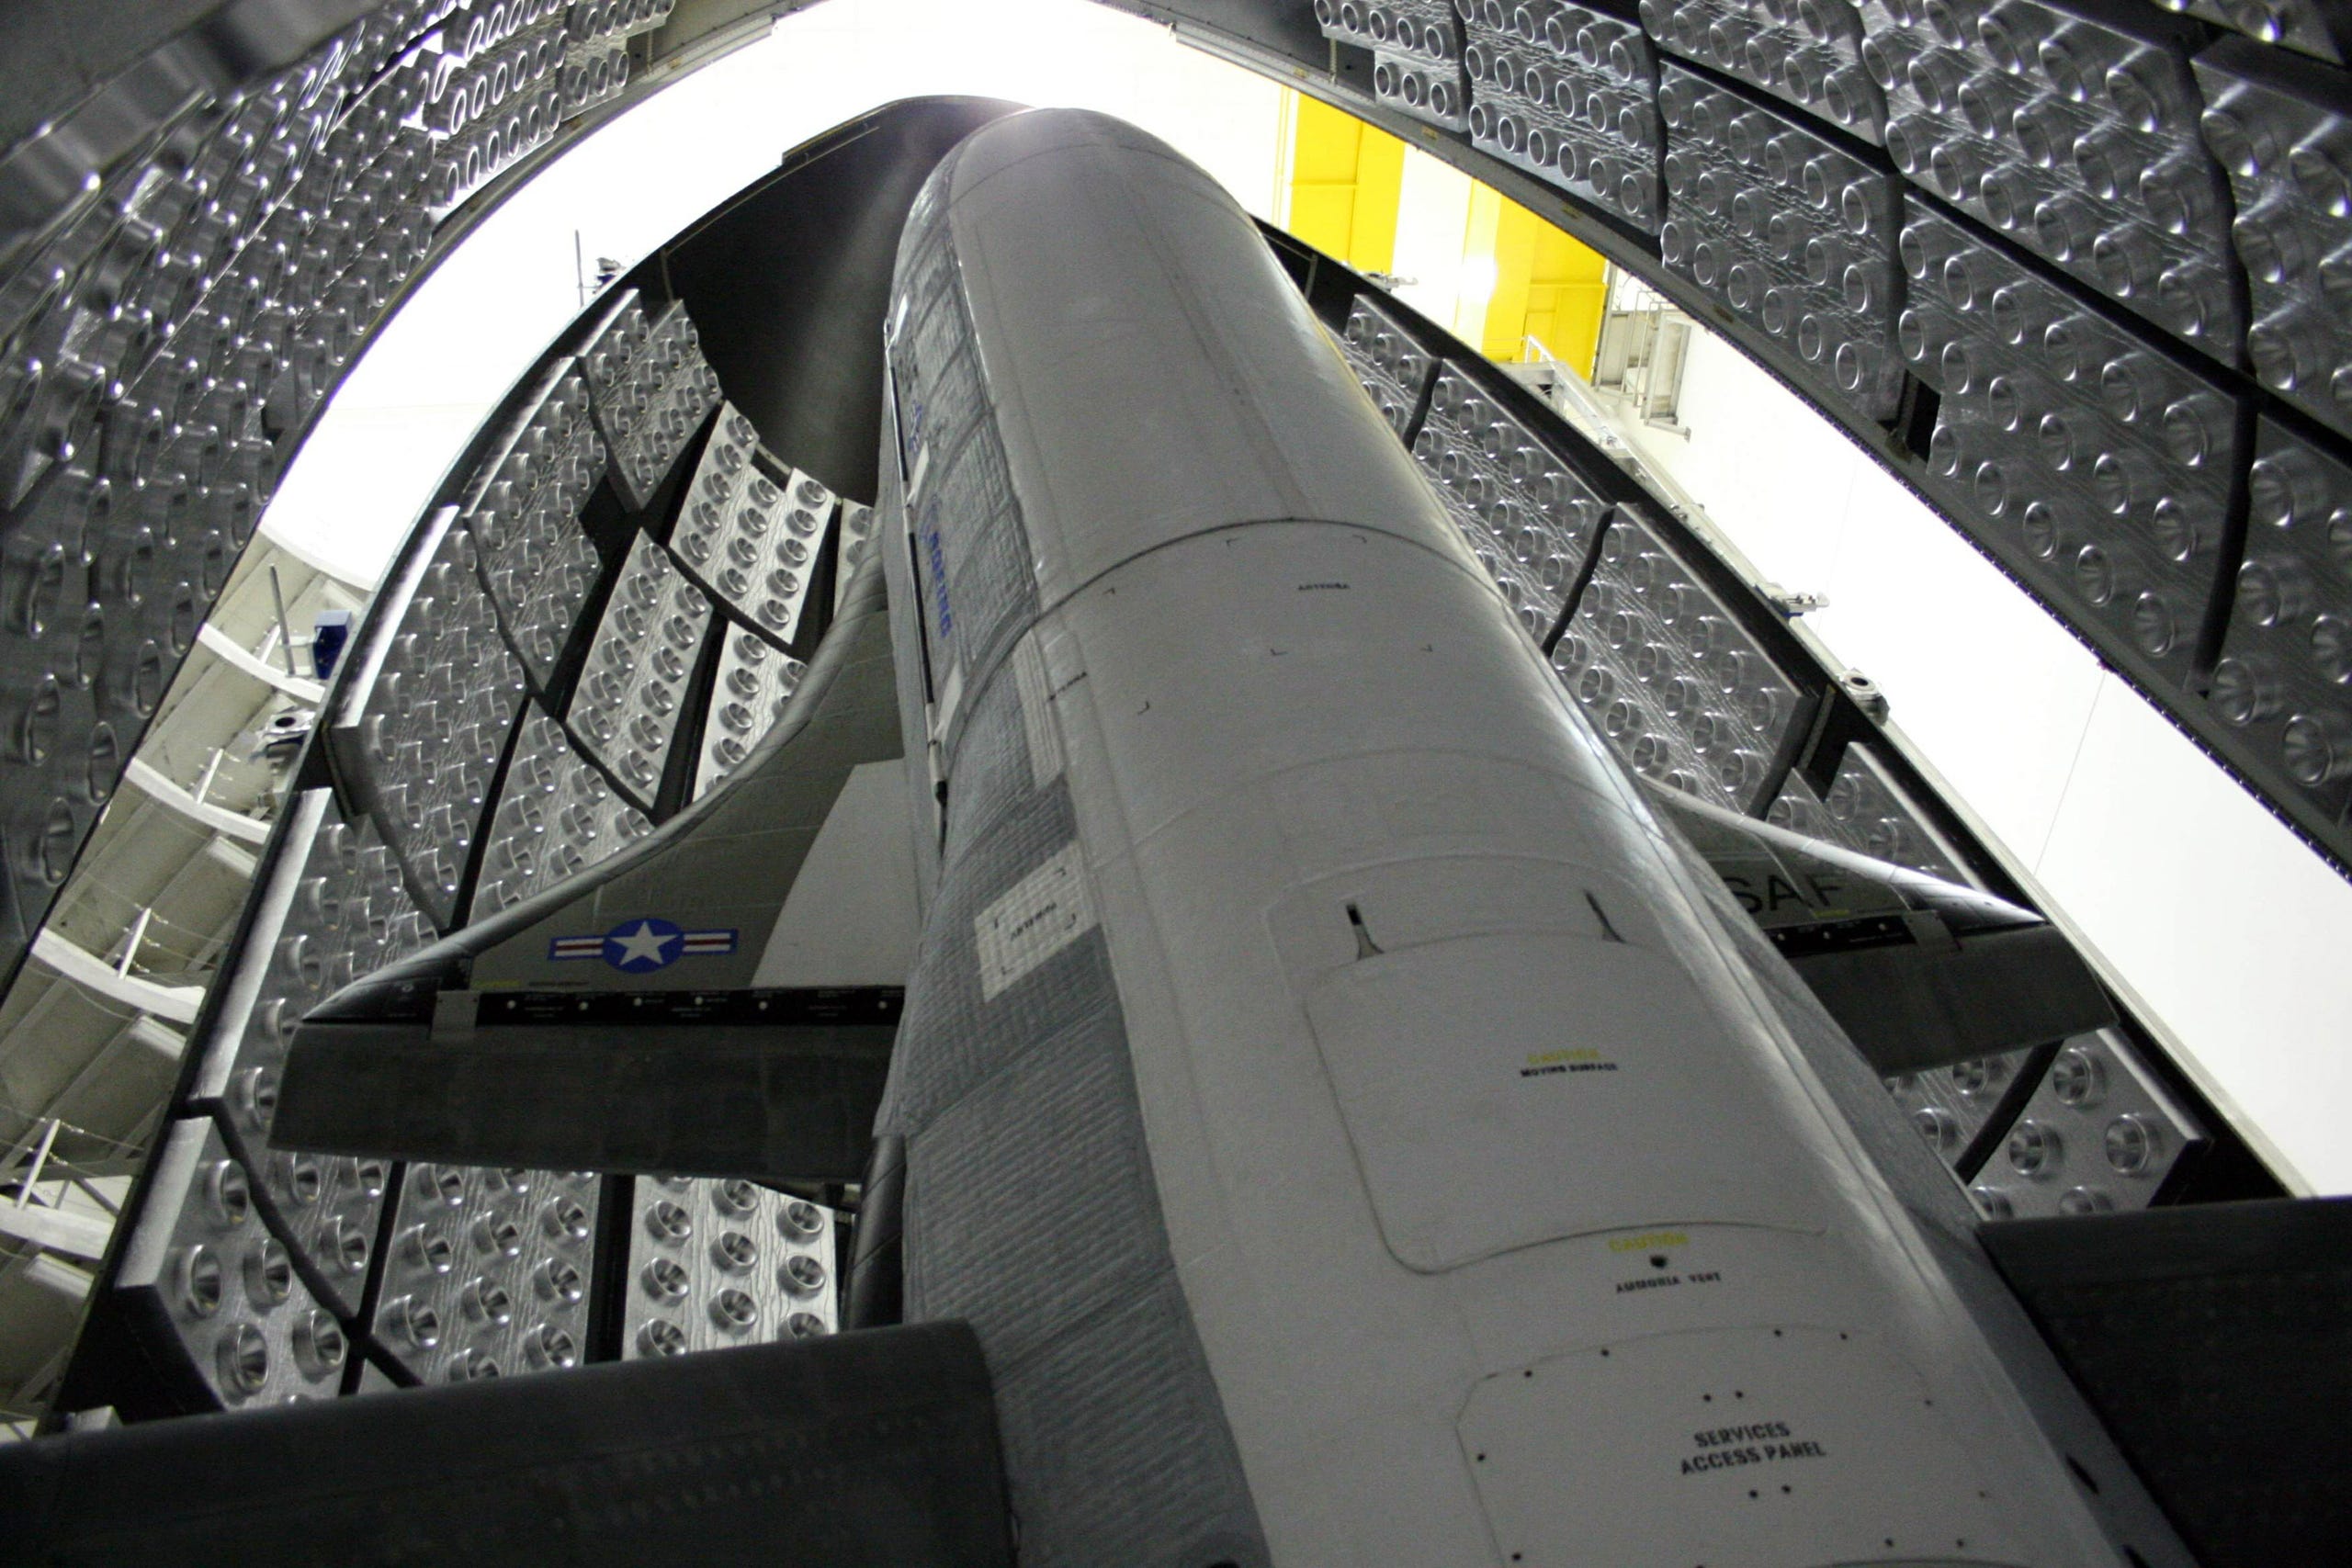 The X-37B Orbital Test Vehicle in the encapsulation cell at the Astrotech facility in Titusville, Fla., in April 2010.